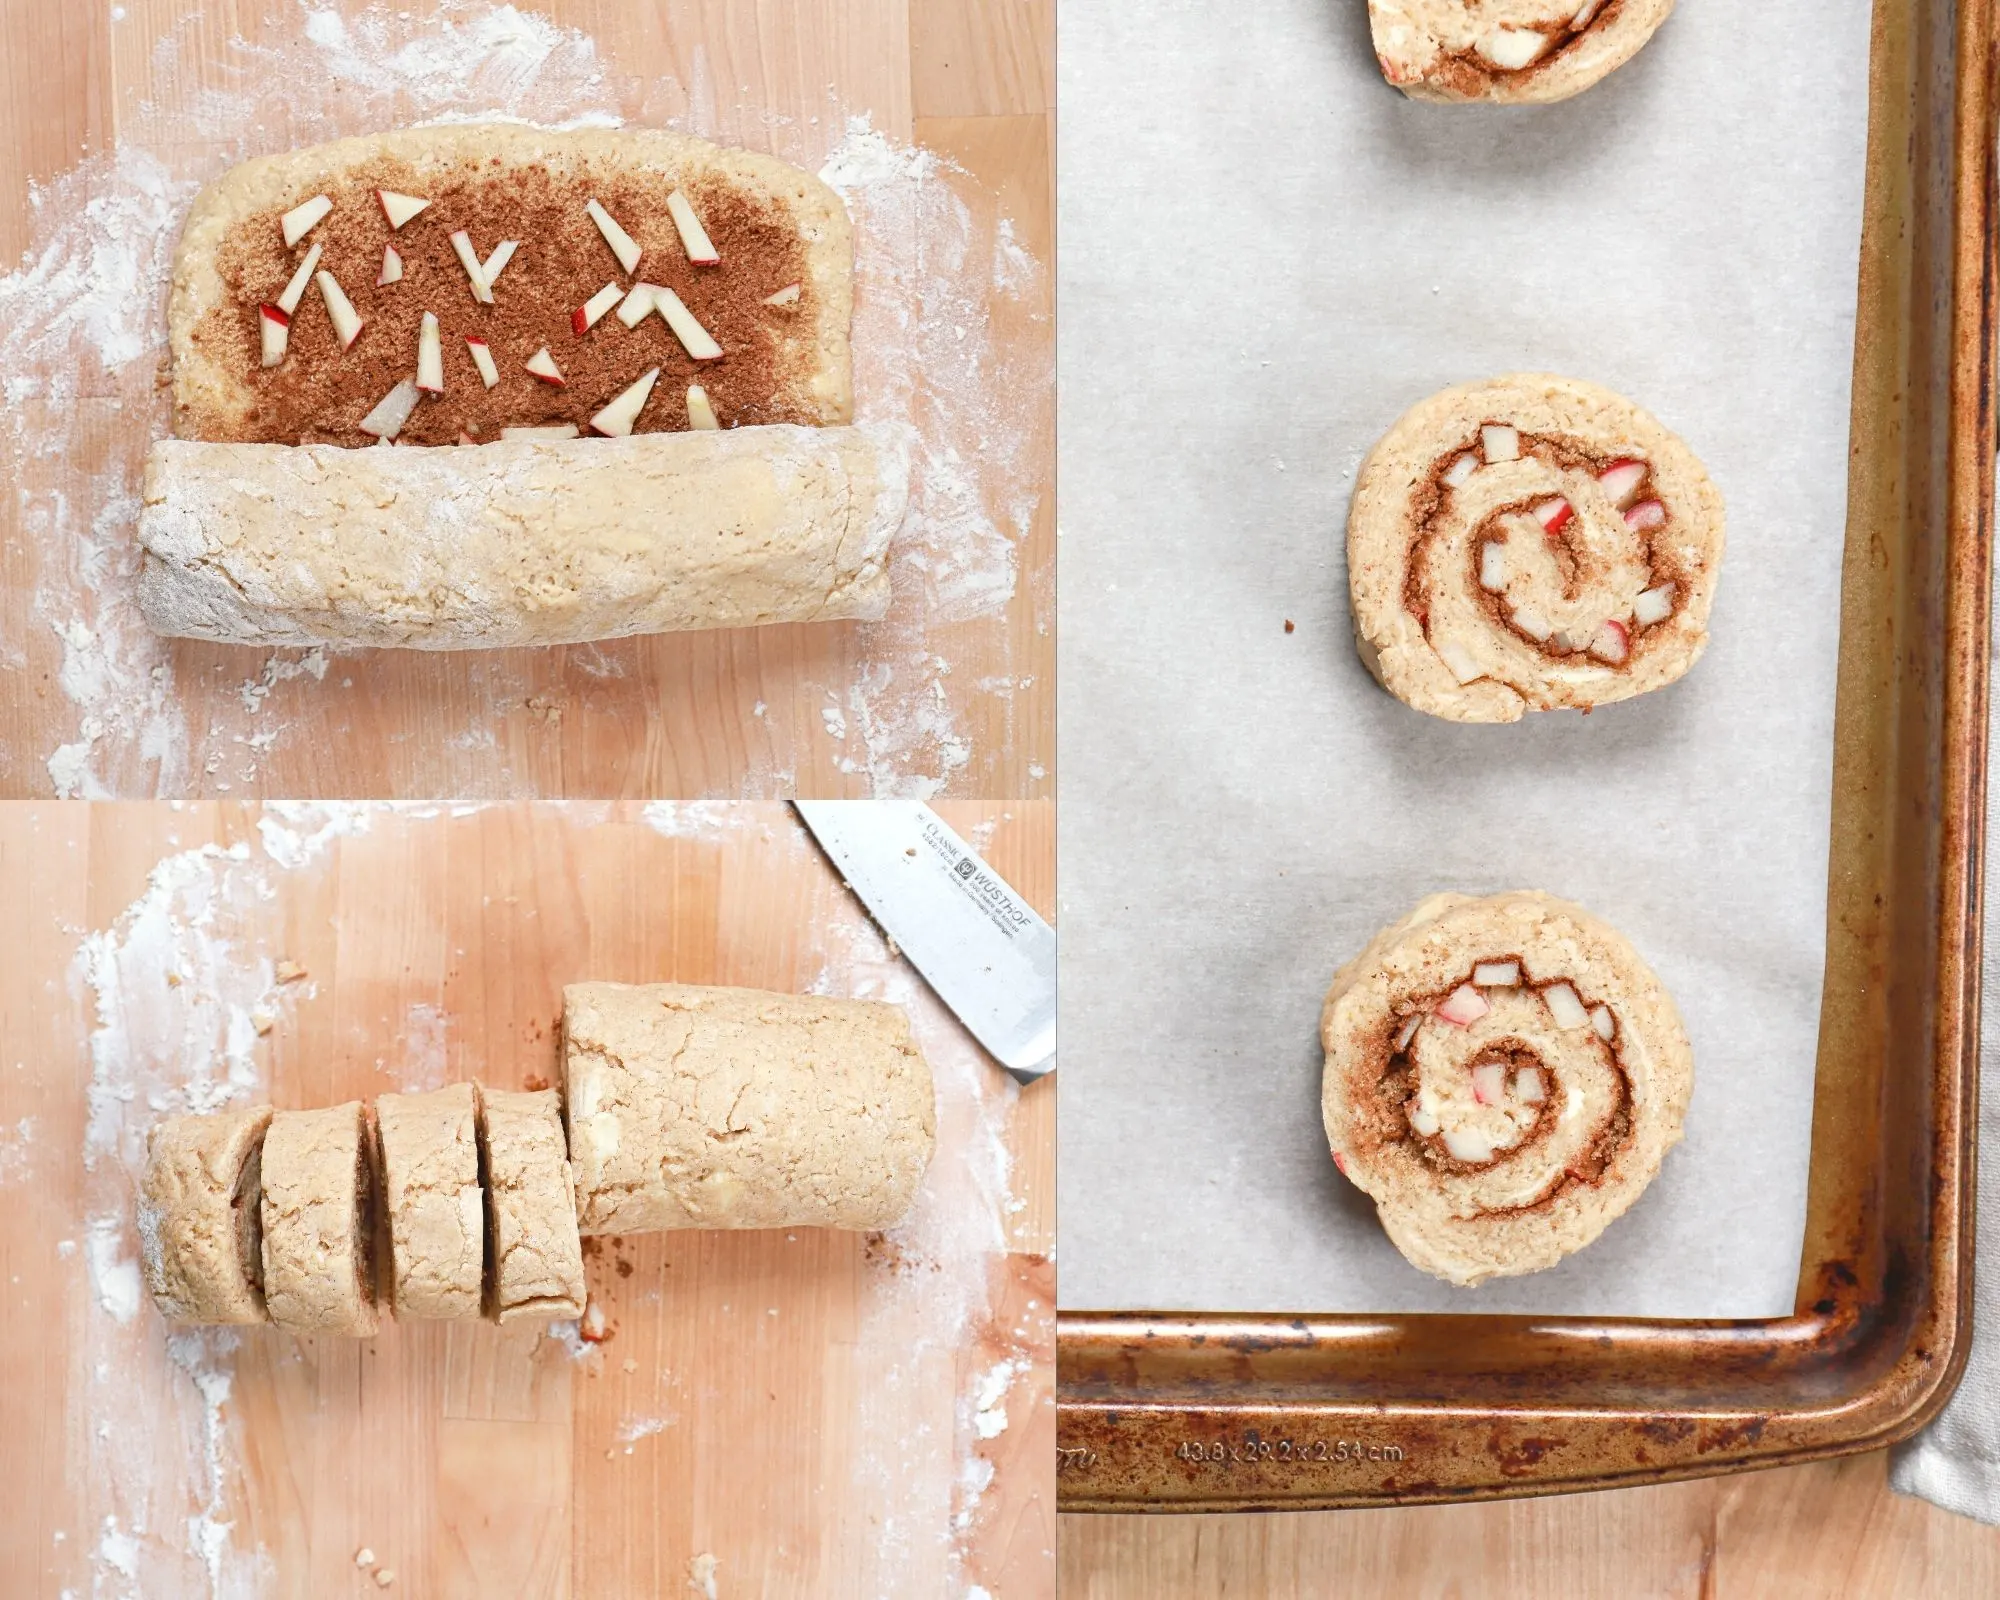 A collage of the process of rolling up and cutting the dough into spirals